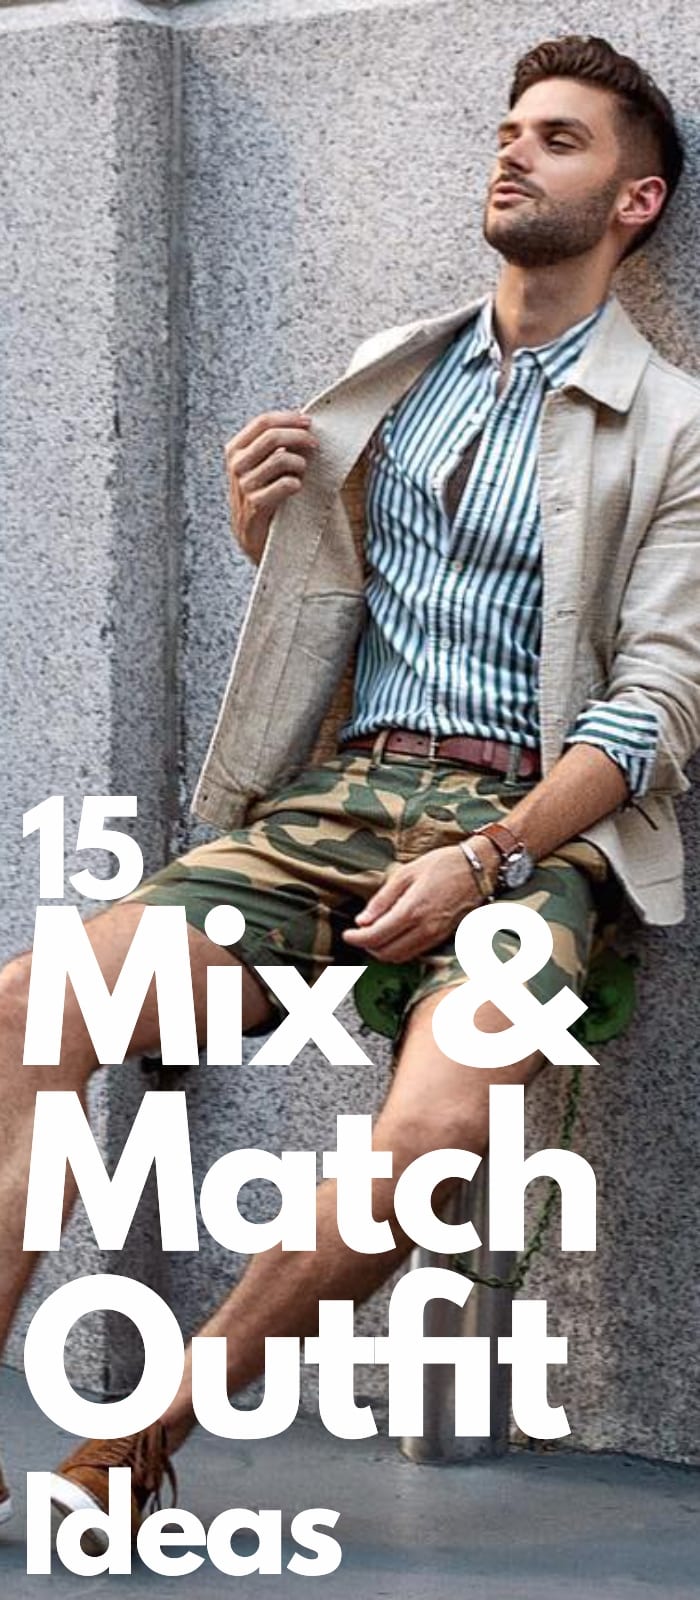 Mix Match Outfit ideas for men